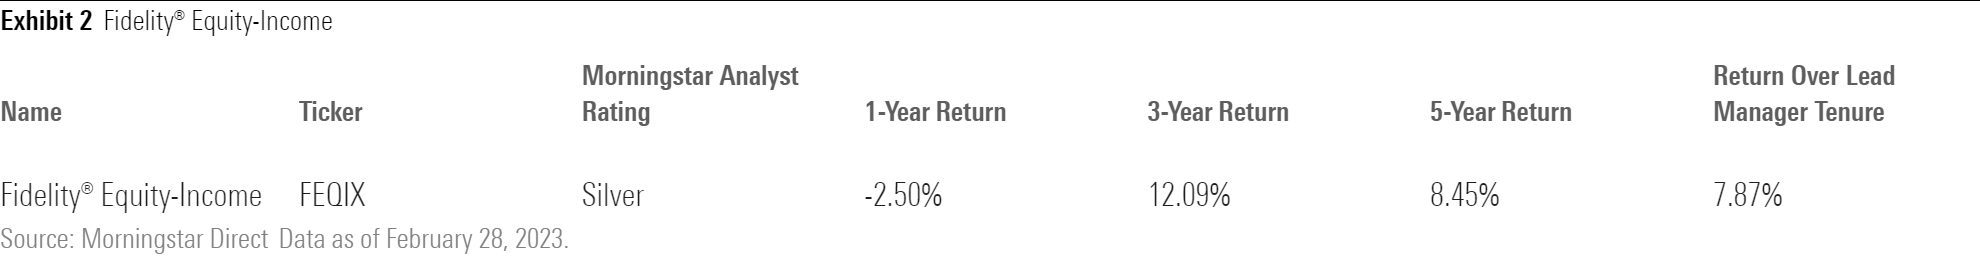 Fidelity Equity-Income's Morningstar Analyst Rating and returns.